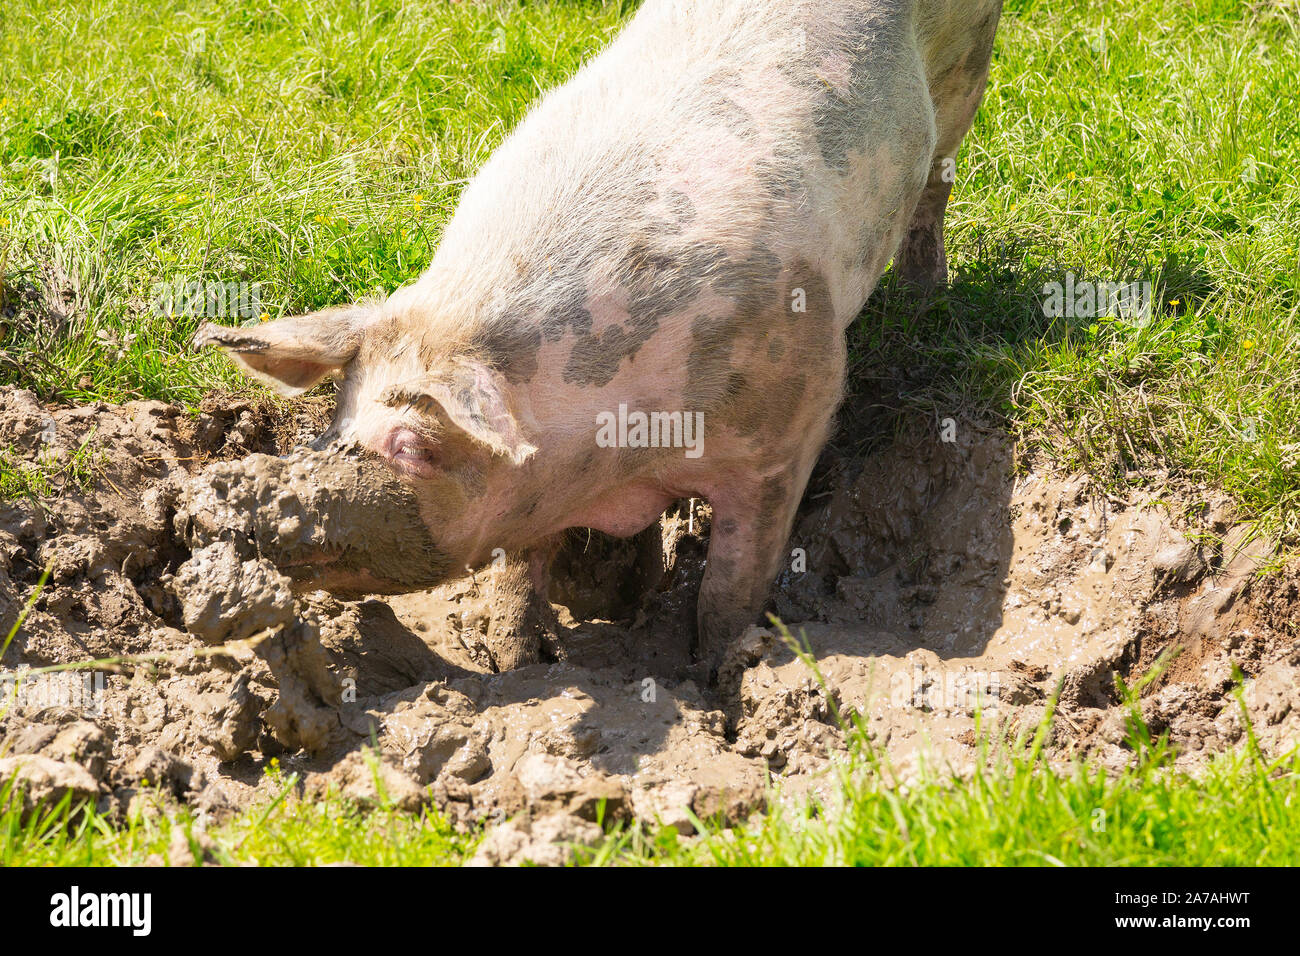 Rescued pig is taking a bath in a mud hole in an animal sanctuary Stock Photo